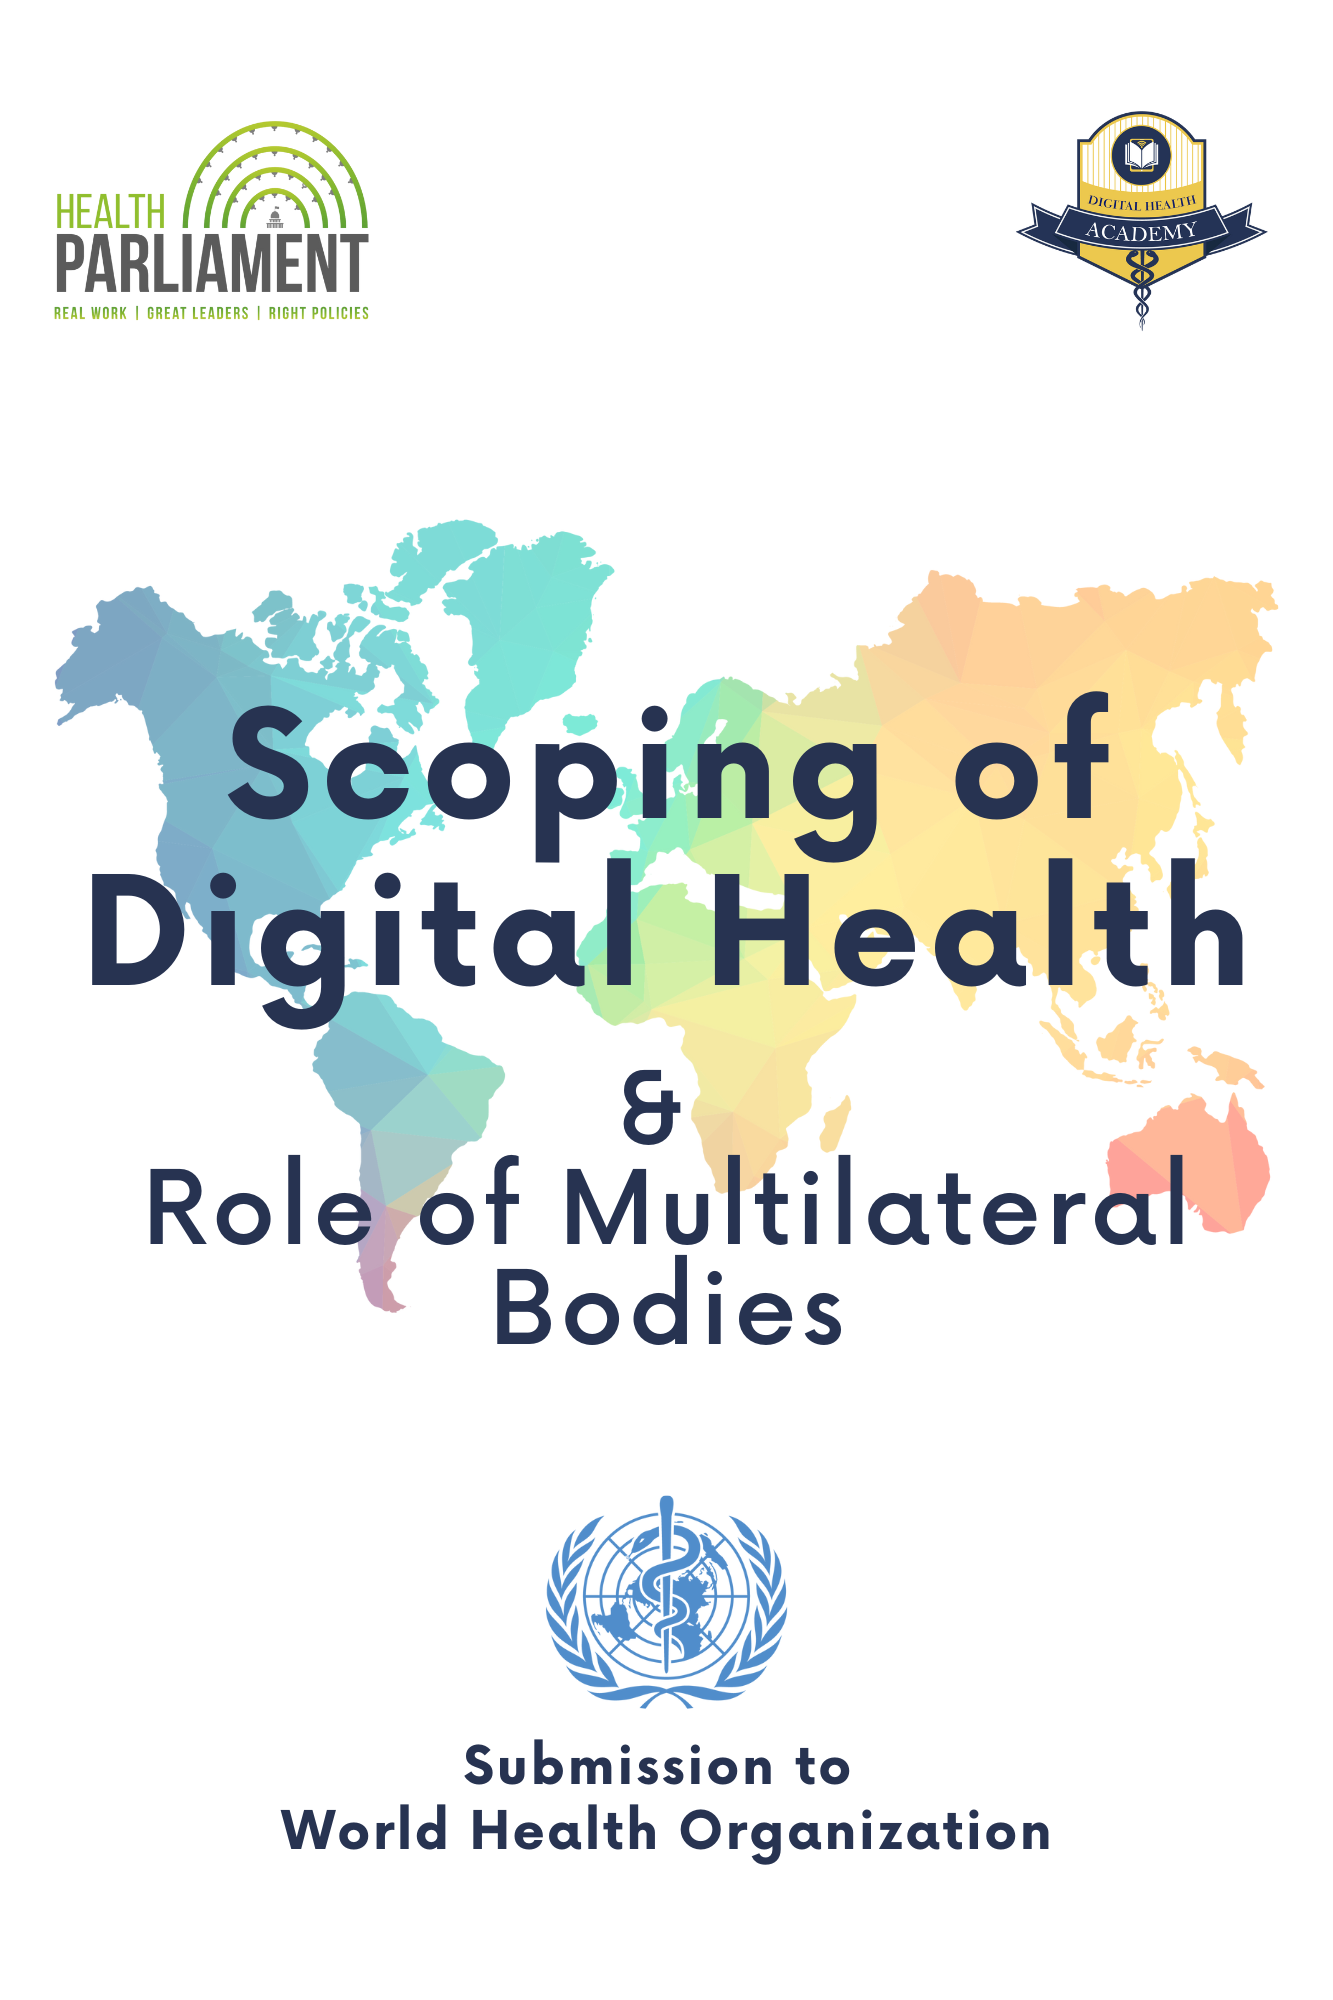 Scoping of Digital Health & Role of Multilateral Bodies